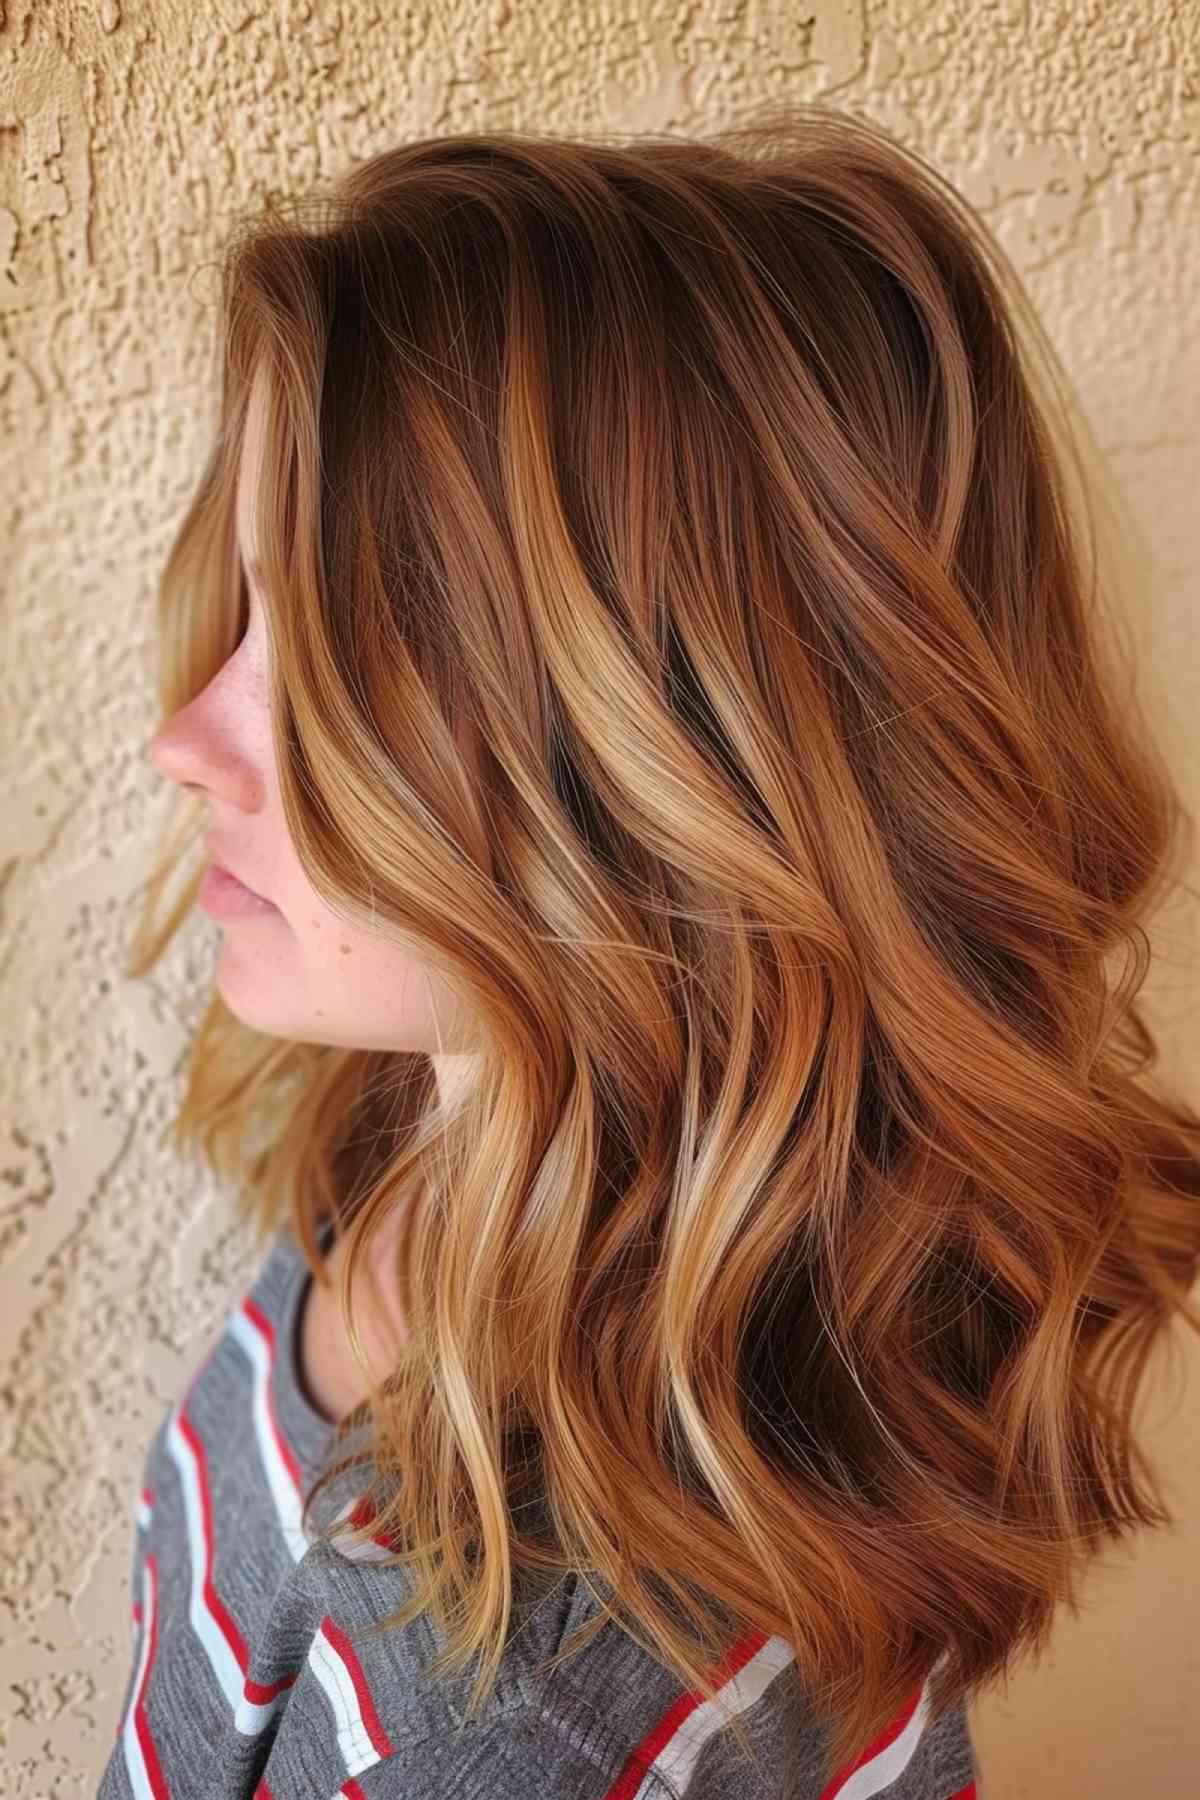 Medium Length Wavy Hair with Warm and Cool Highlights